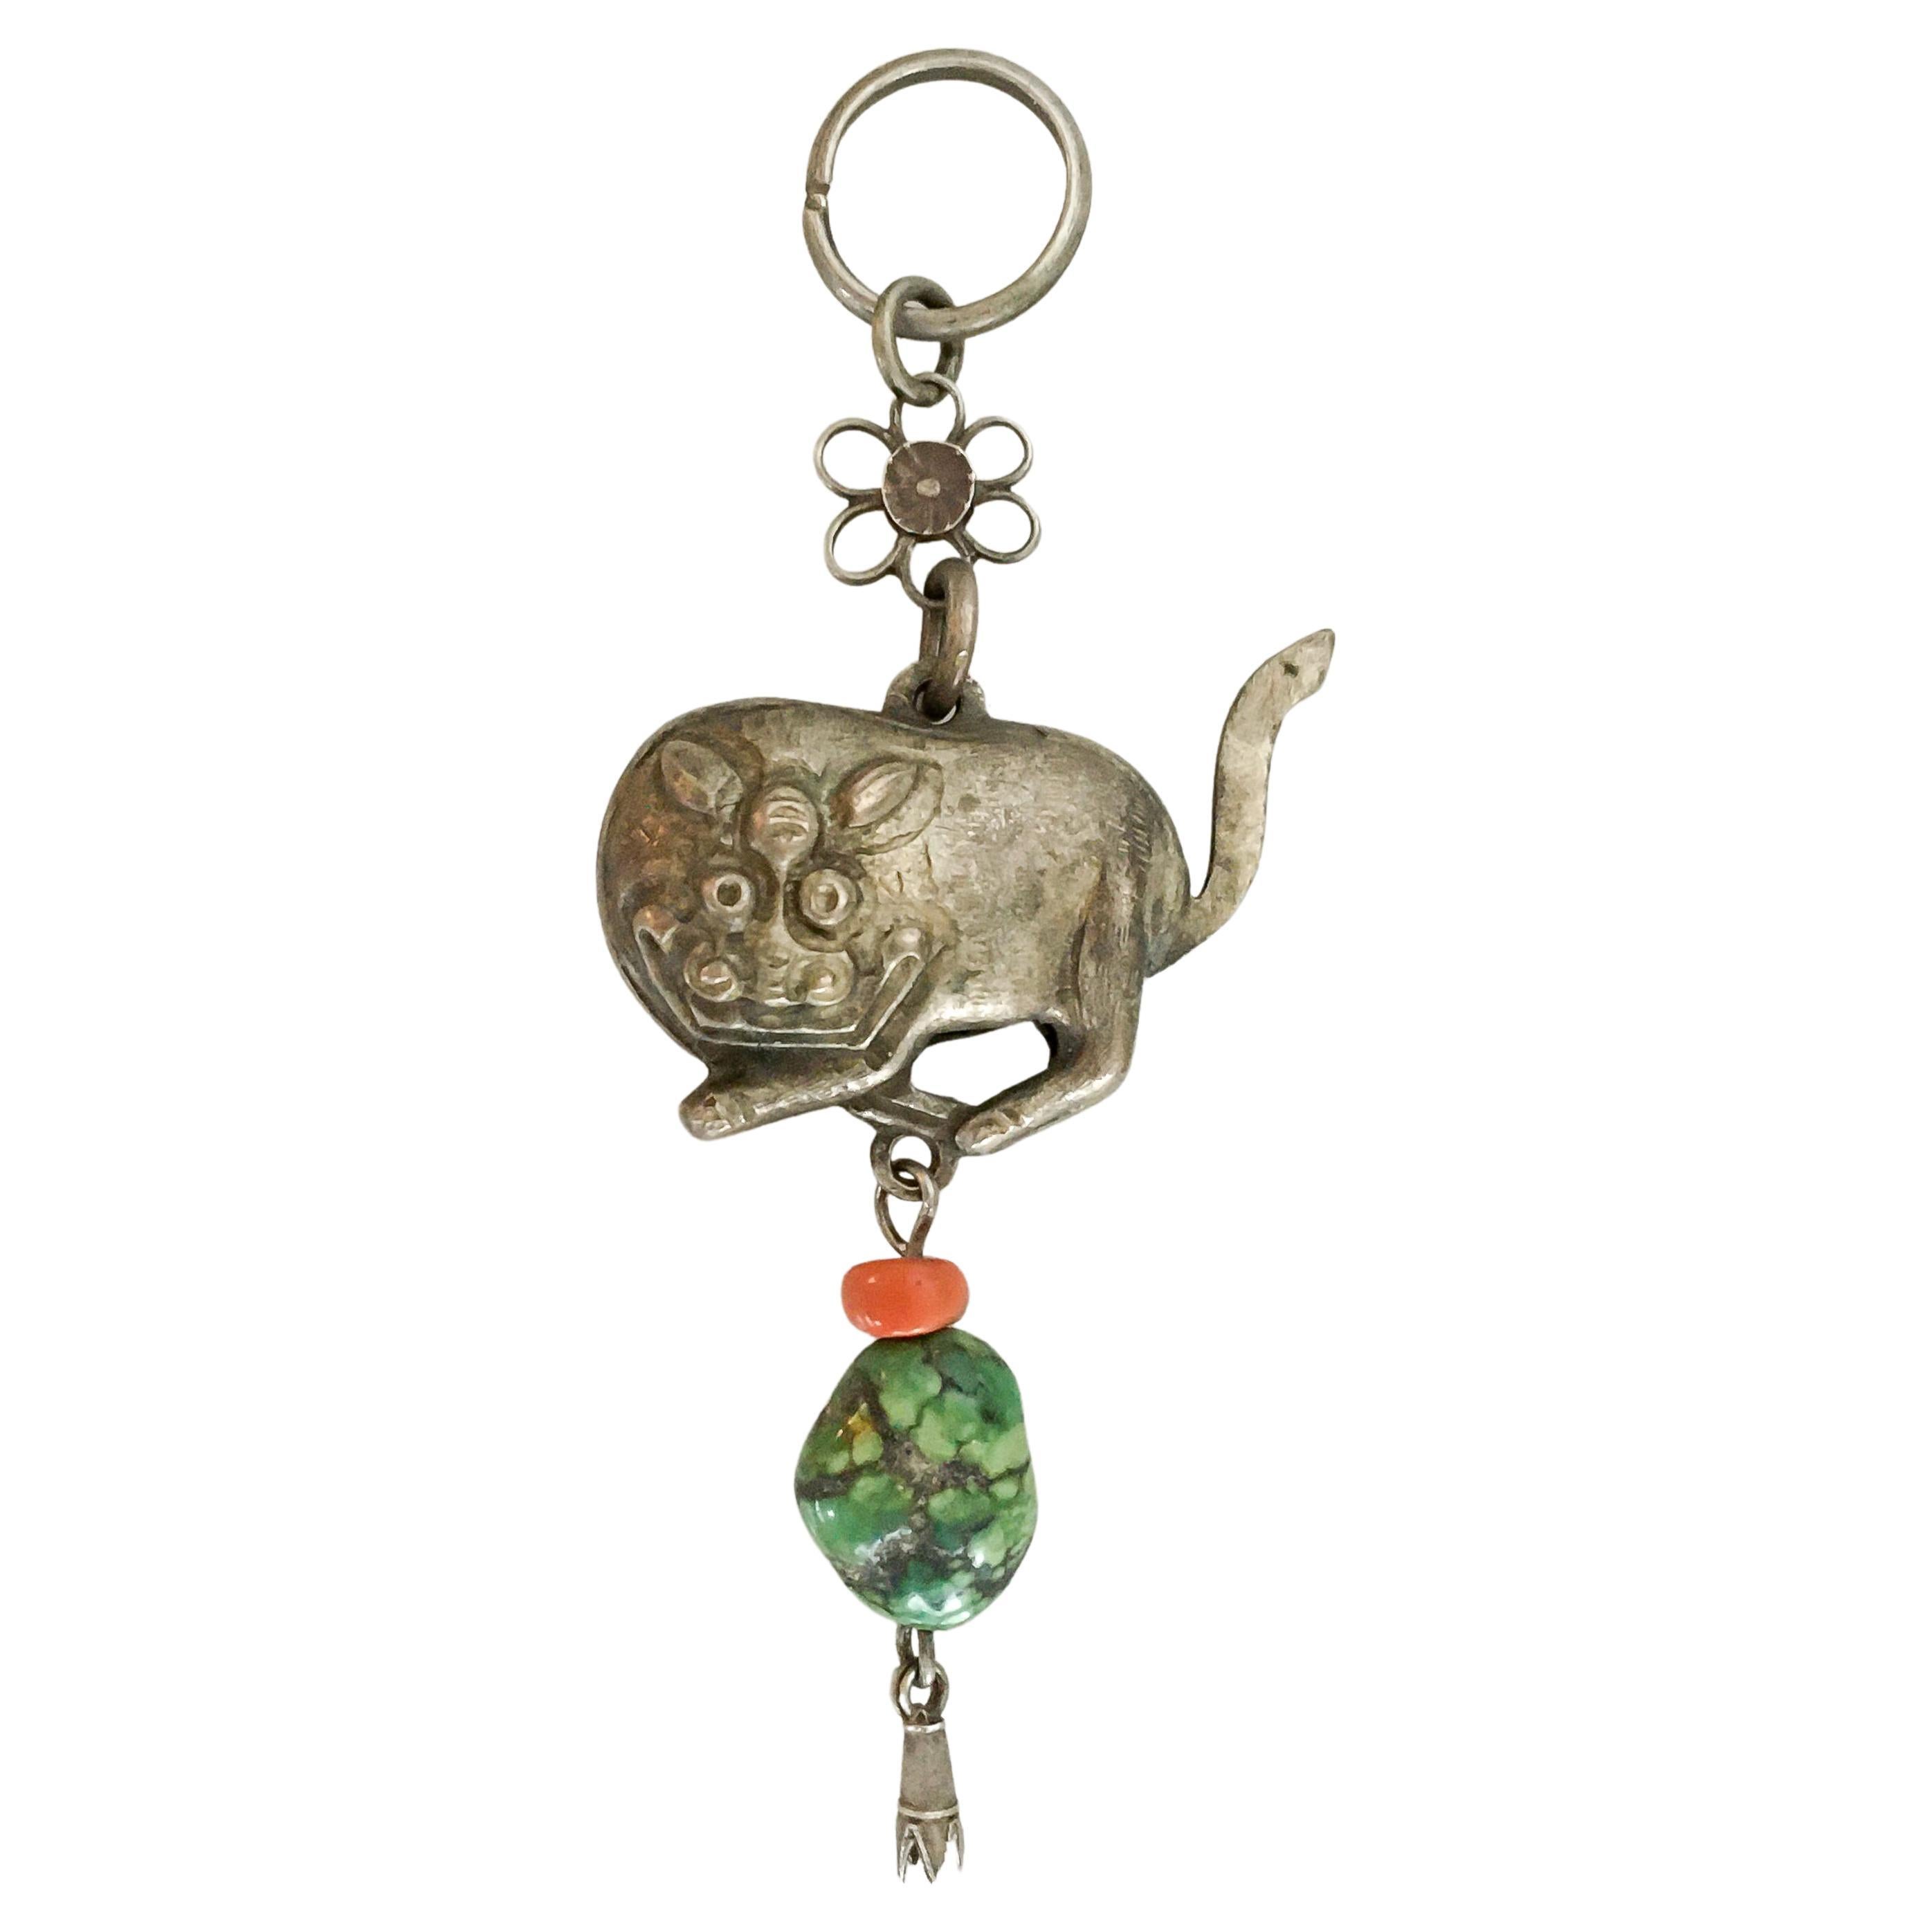 This is an antique Qing dynasty hollow silver Ox amulet attached to a flower chain. The year 2021 is the year of the Ox. It is theorized that a person's characteristics are decided by their birth year's zodiac animal sign and zodiac element. So,